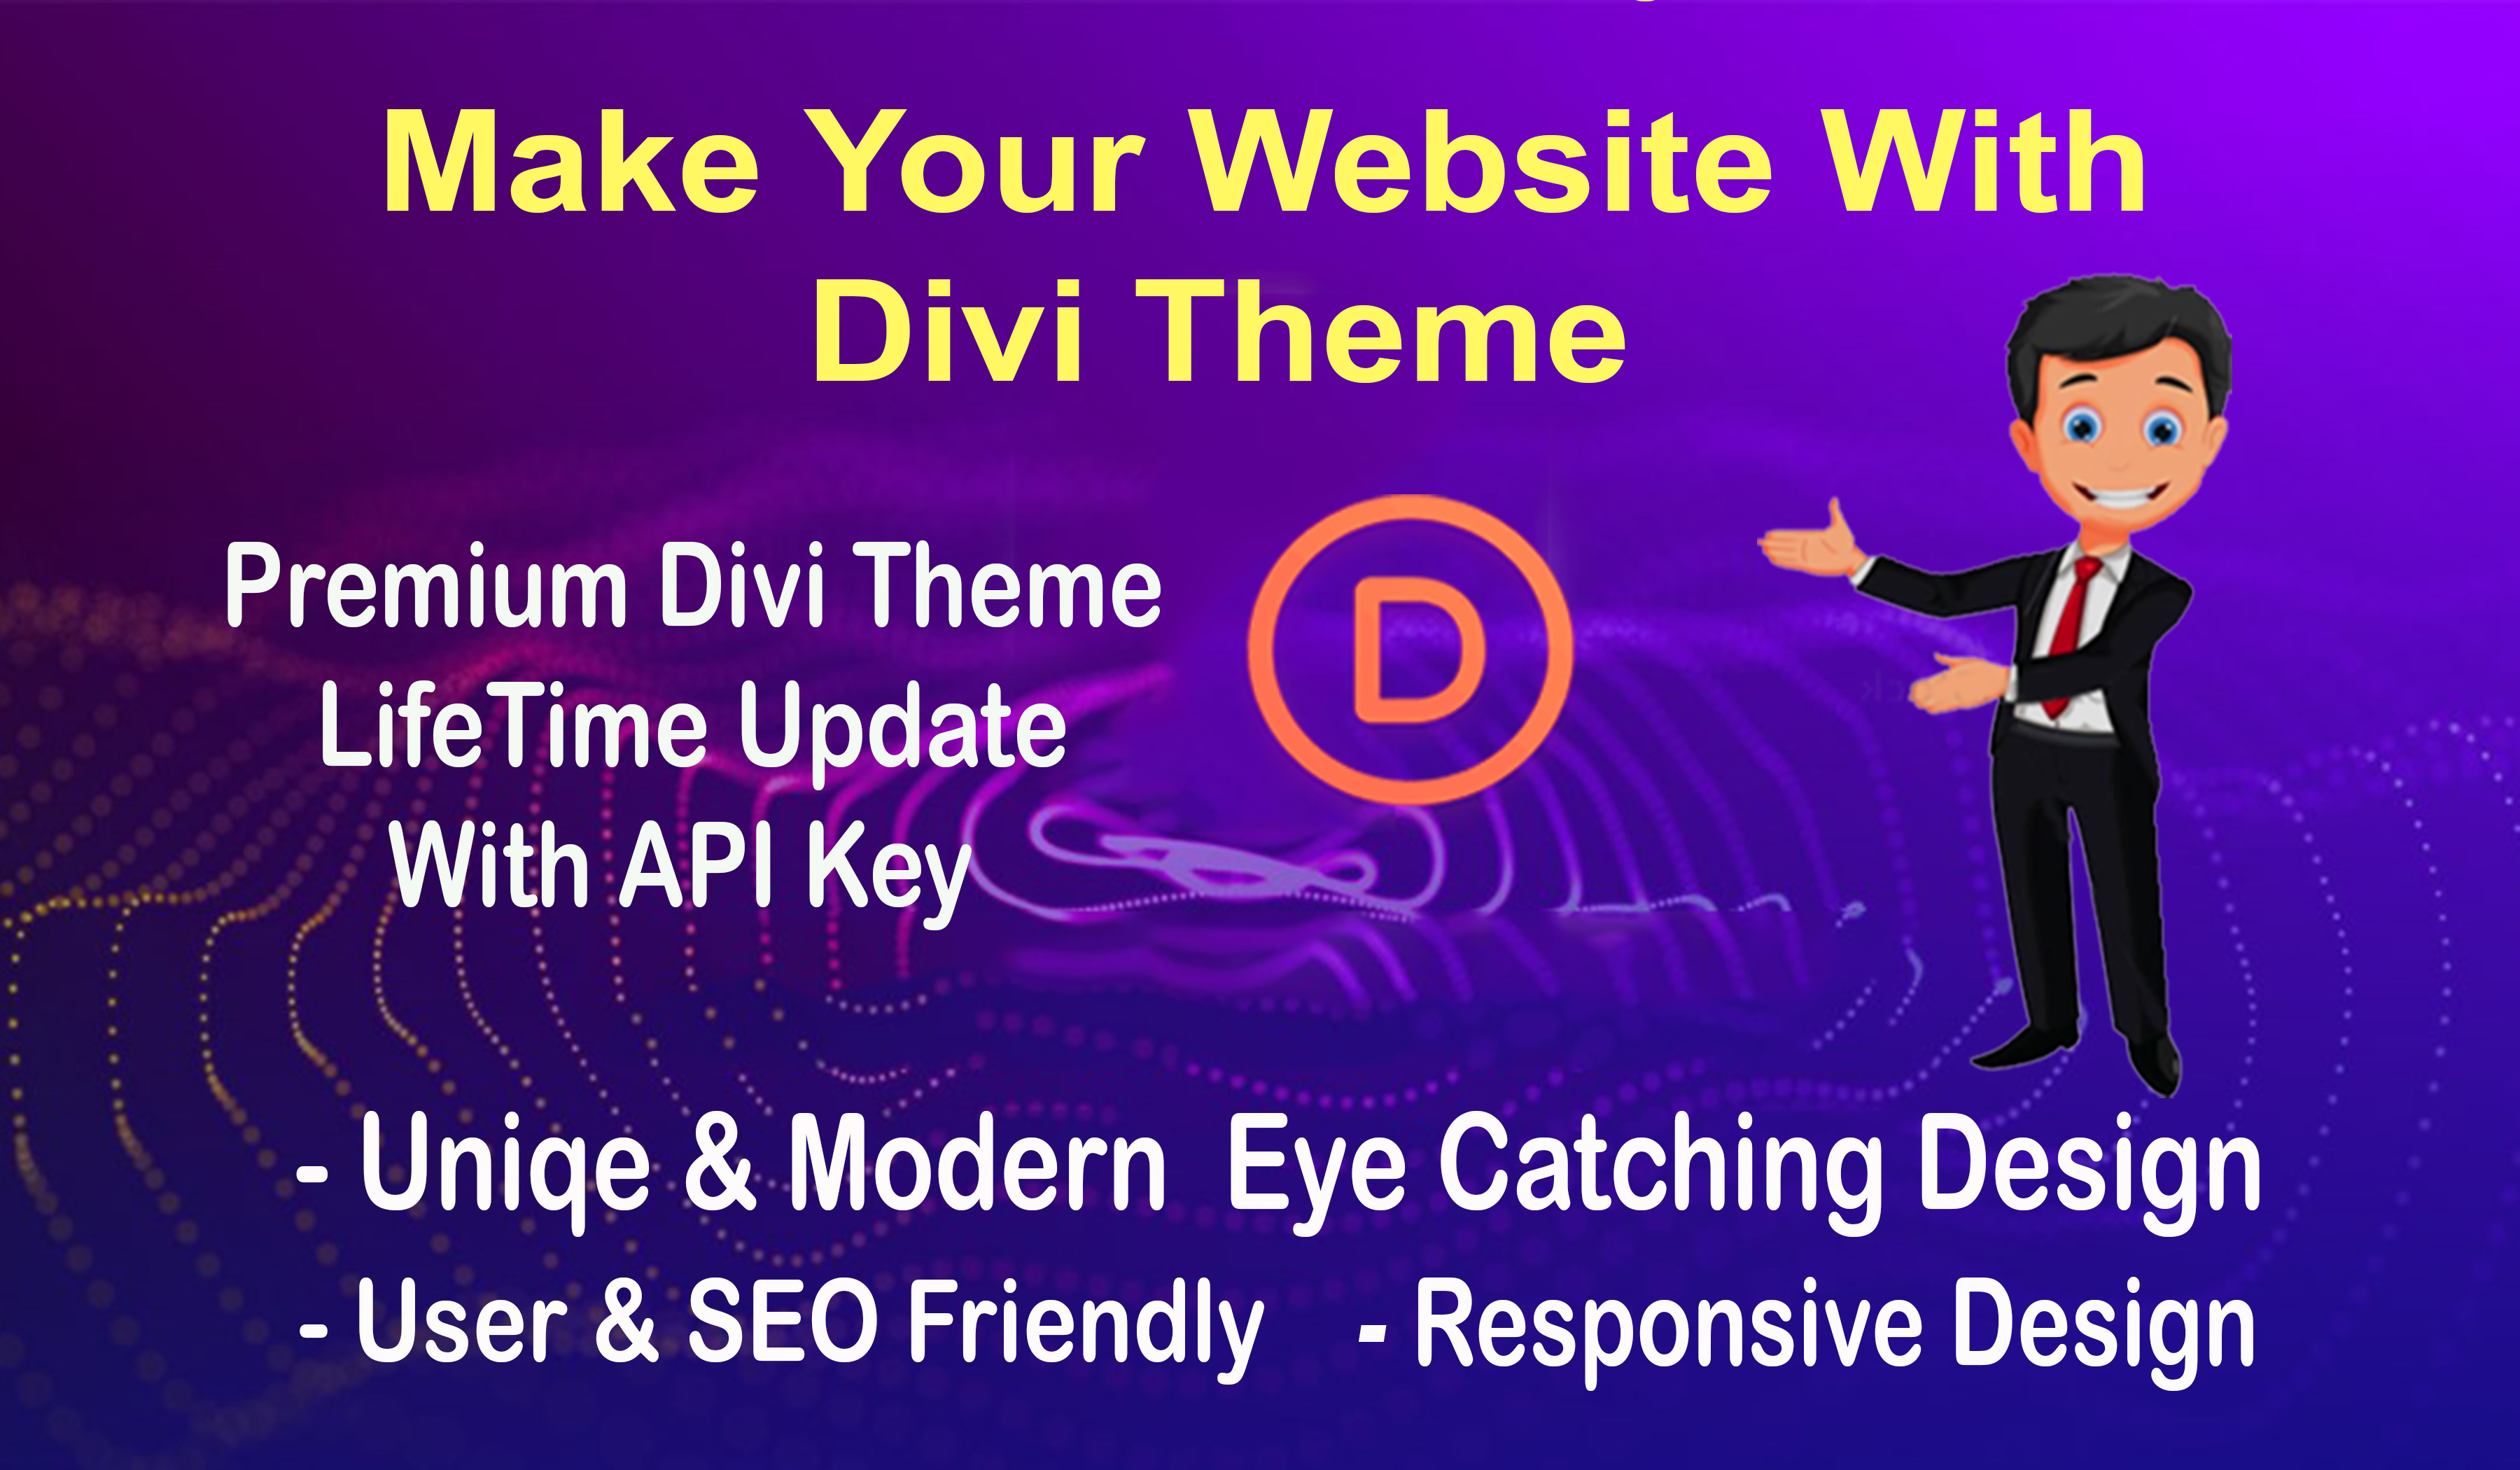 I will design your Full wordpress website with divi theme and do customization